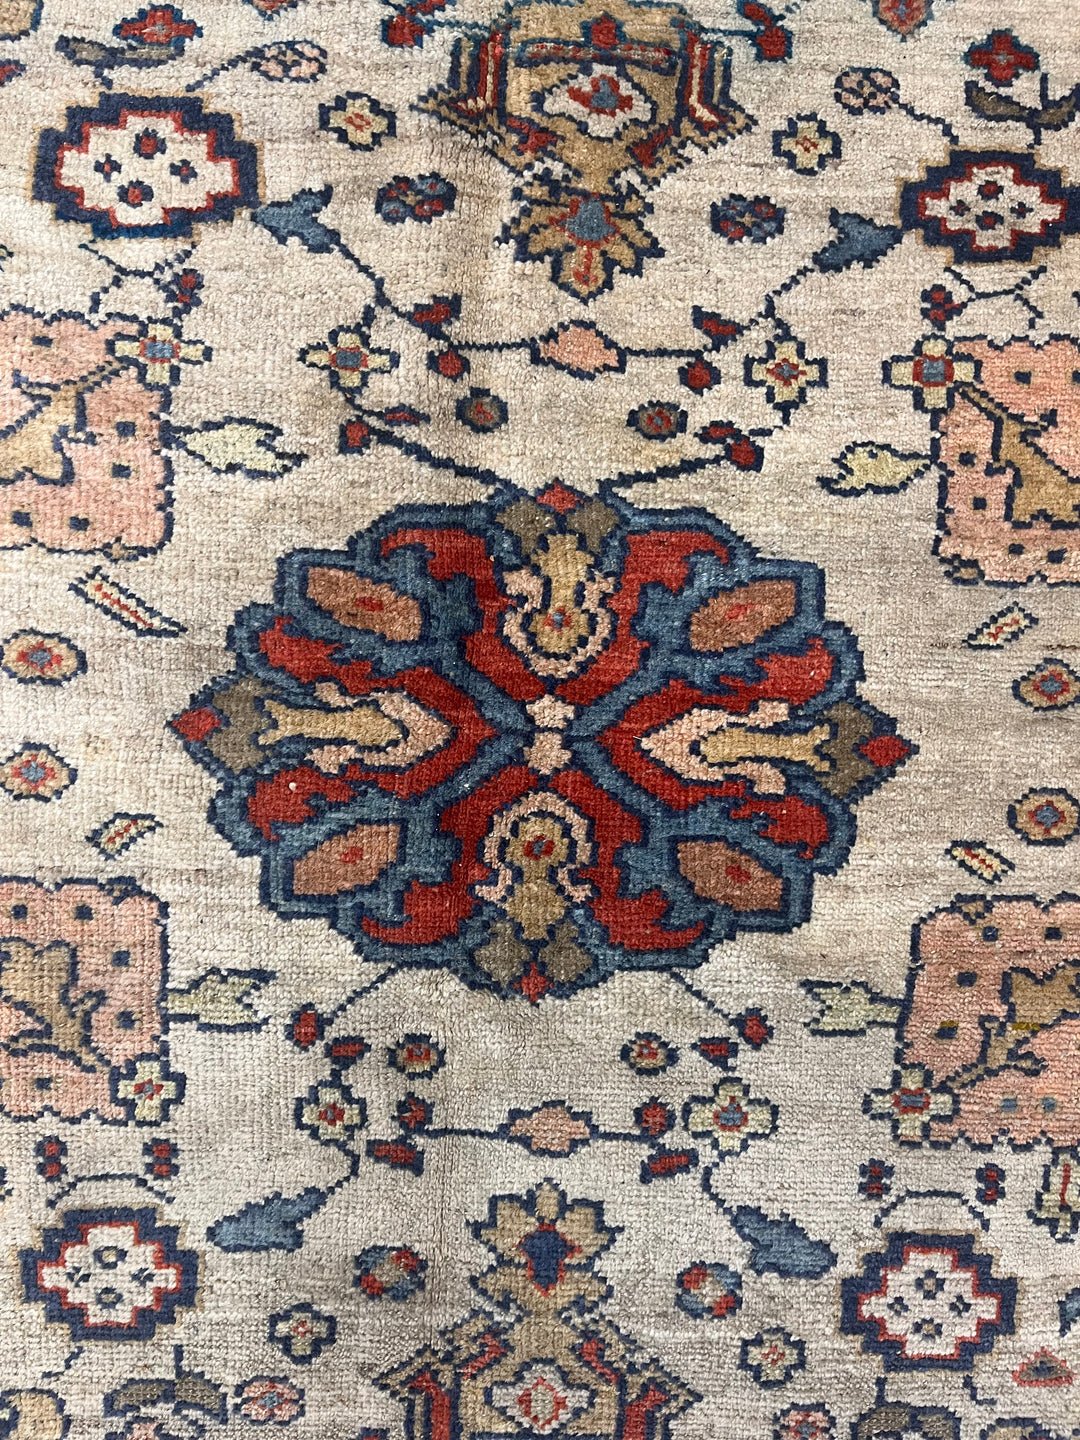 Antique Persian Sultanabad Mahal Rug 7’2" x 10’1”